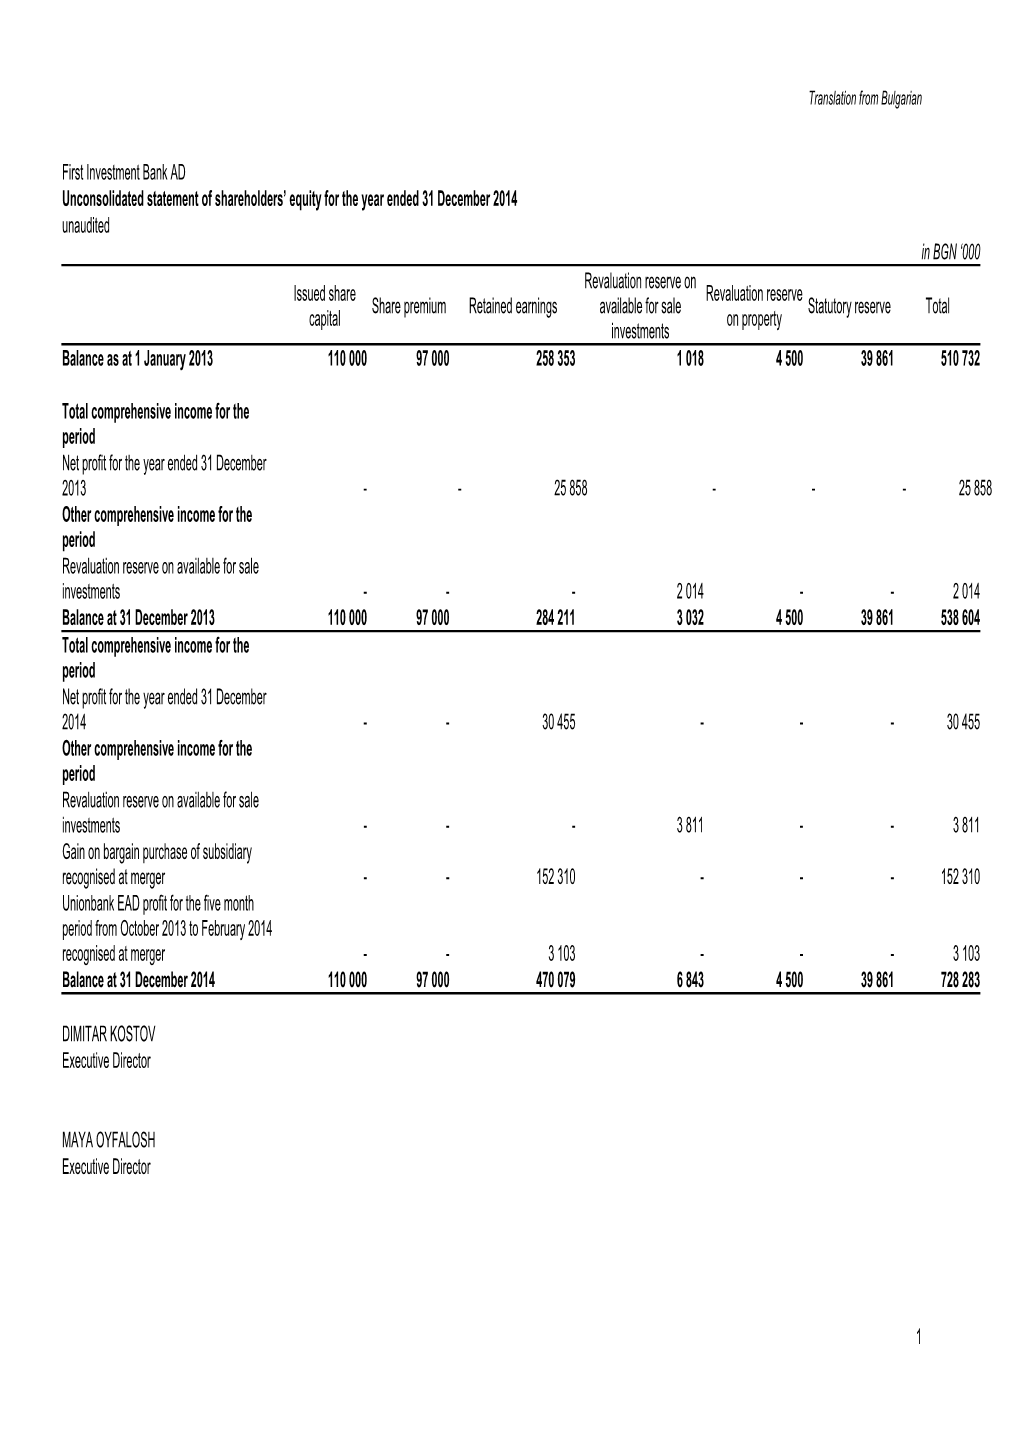 Unconsolidated Financial Statements of First Investment Bank AD As at 31